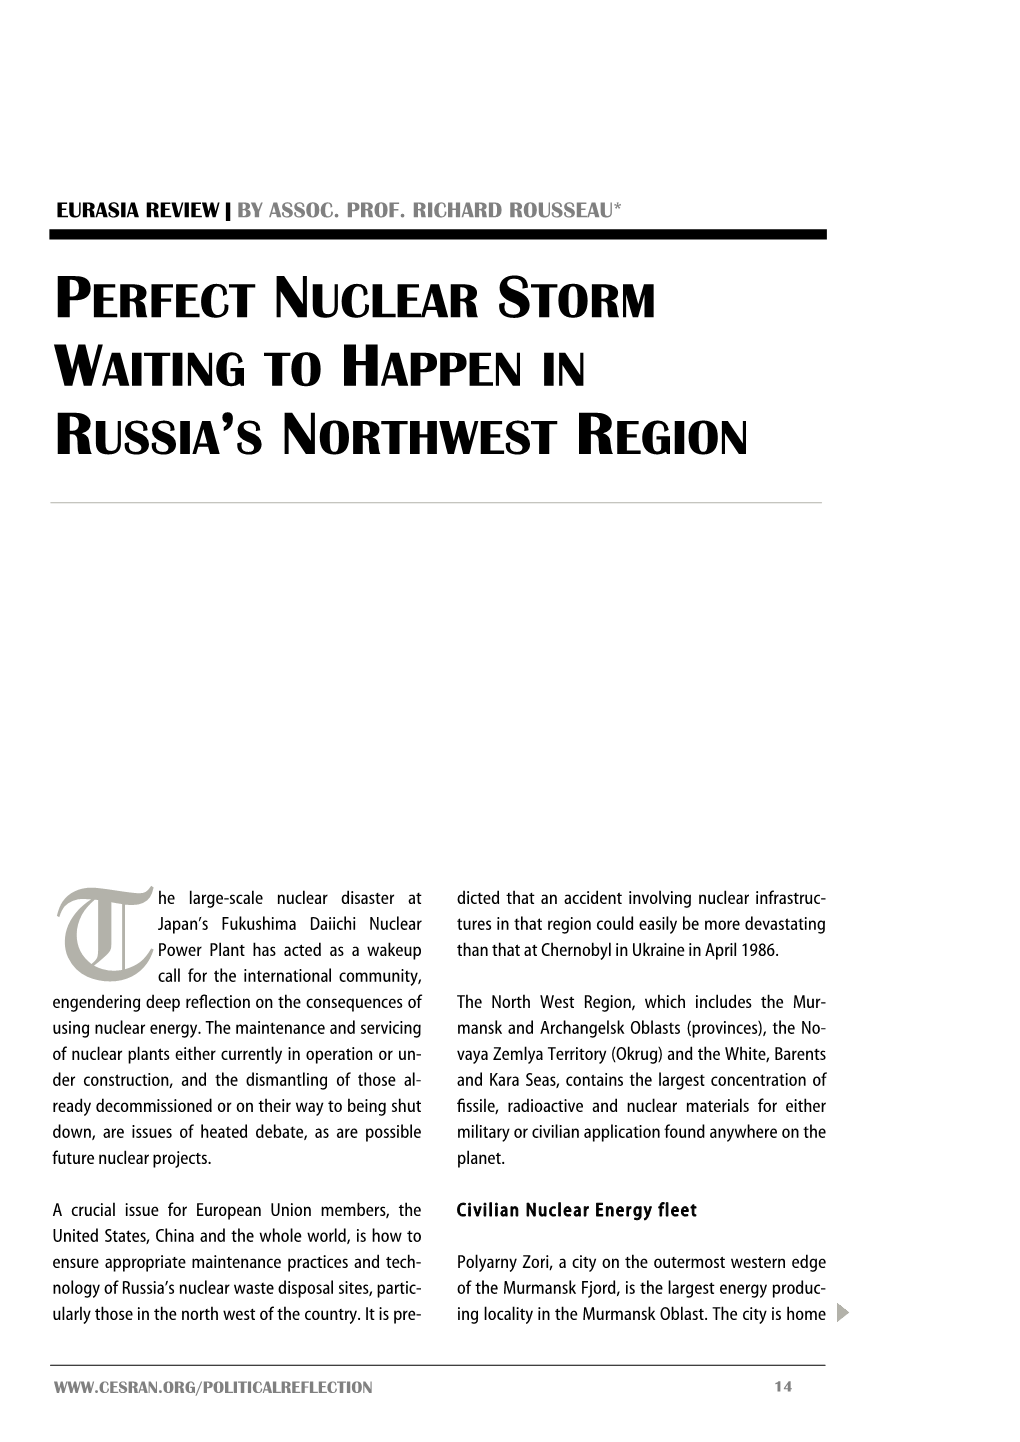 Perfect Nuclear Storm Waiting to Happen in Russia's